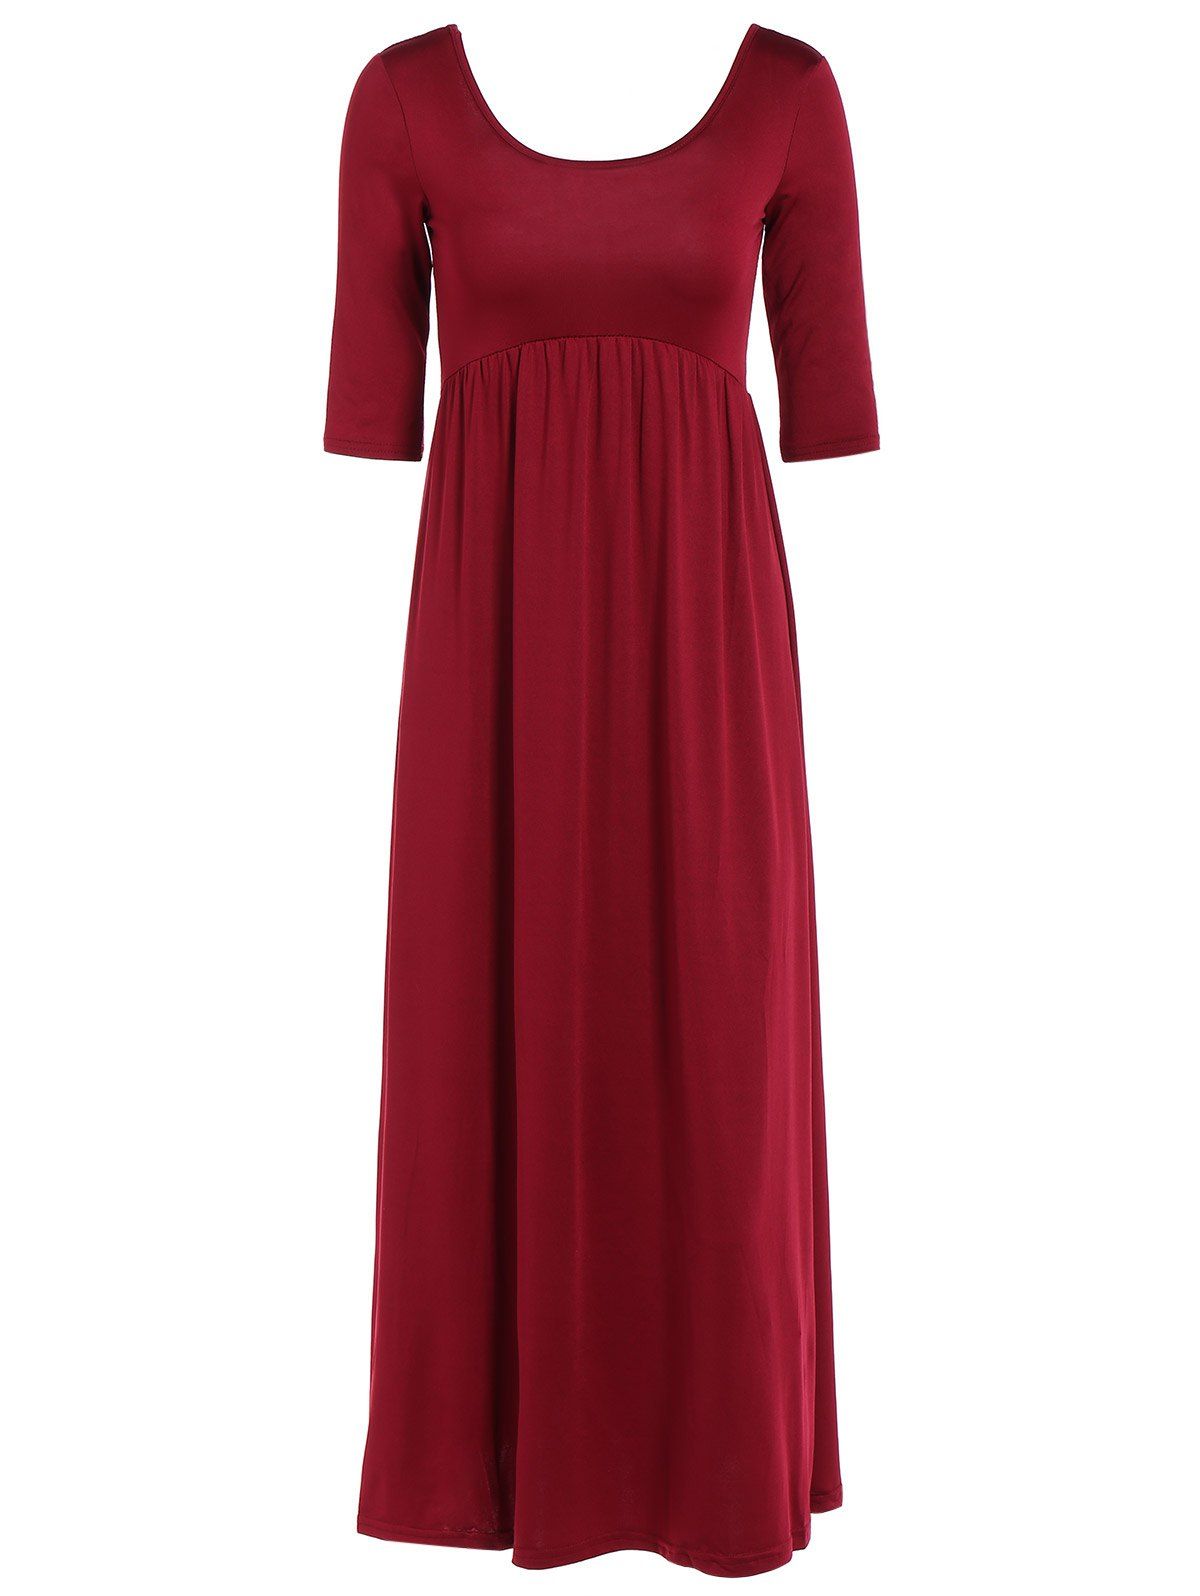 [17% OFF] 2021 Ruched Empire Waist Long Formal Dress In WINE RED ...